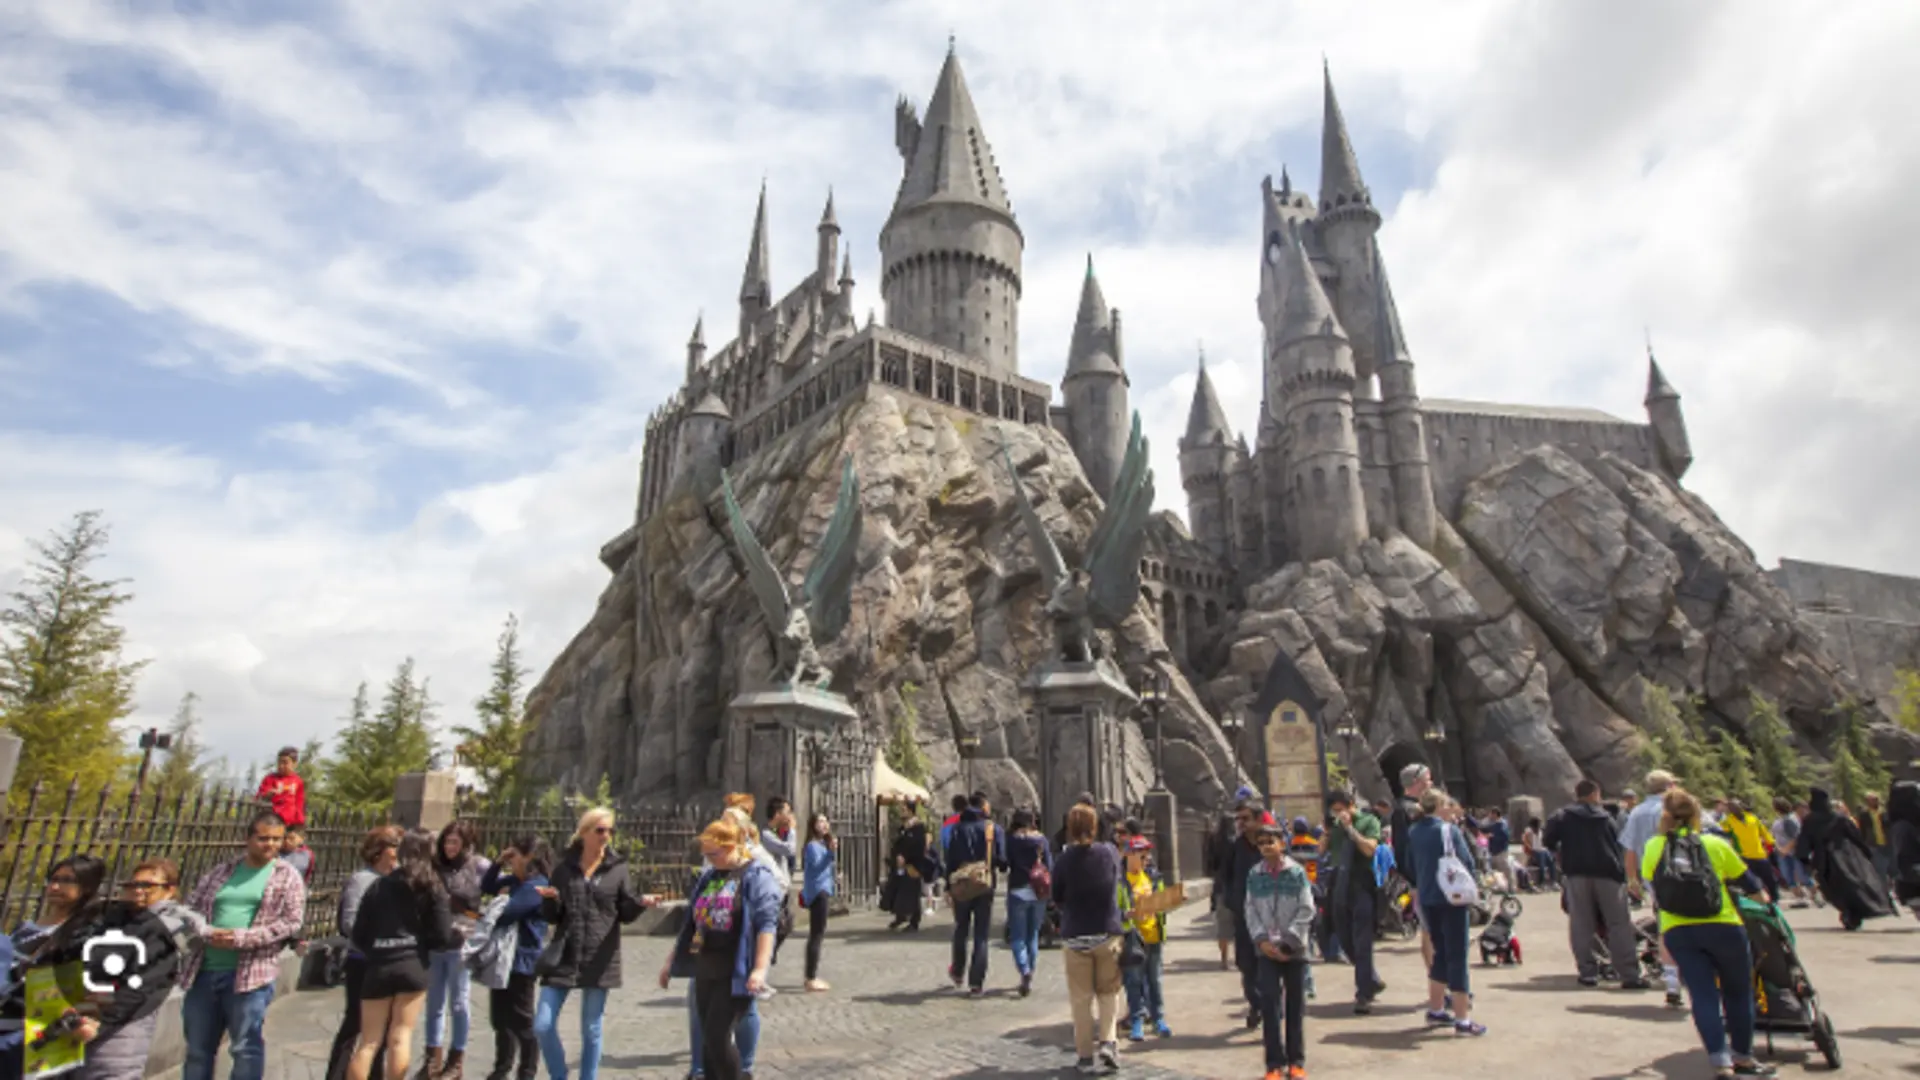 The Wizarding World of Harry Potter – Universal Studios Hollywood